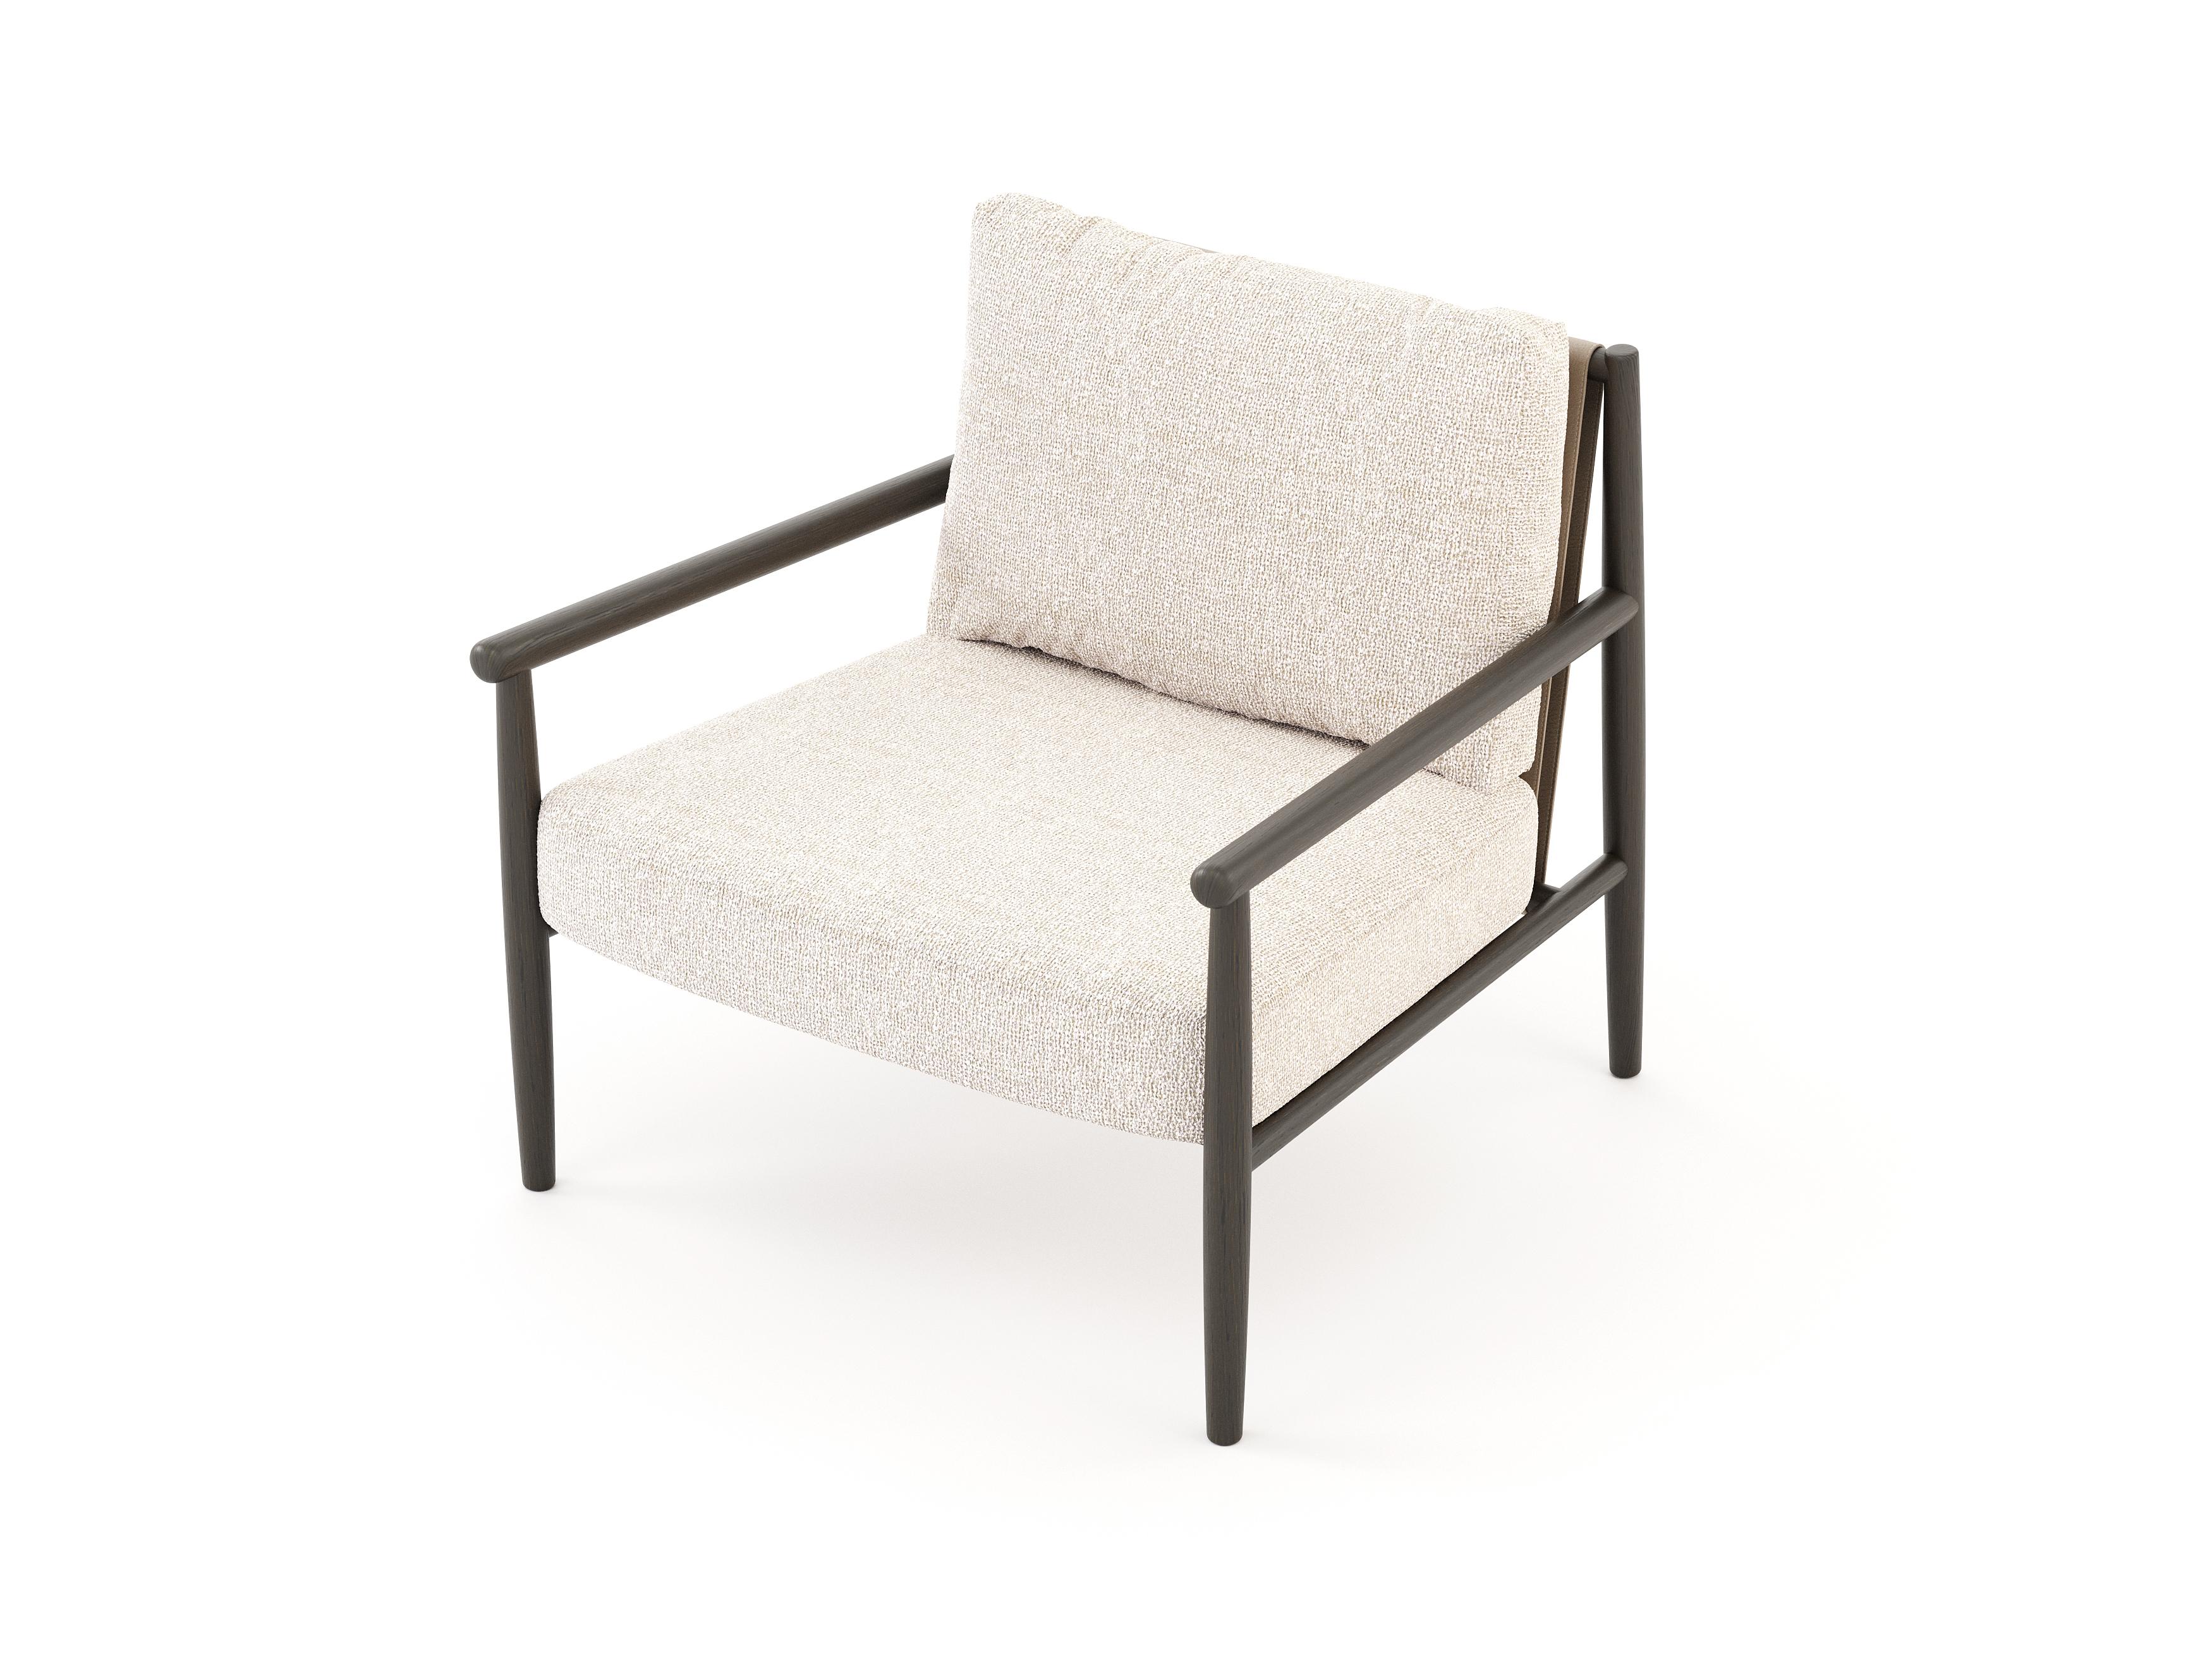 Portuguese Scandinavian Modern Landform Armchair Made with Wood and Textile, Handmade For Sale